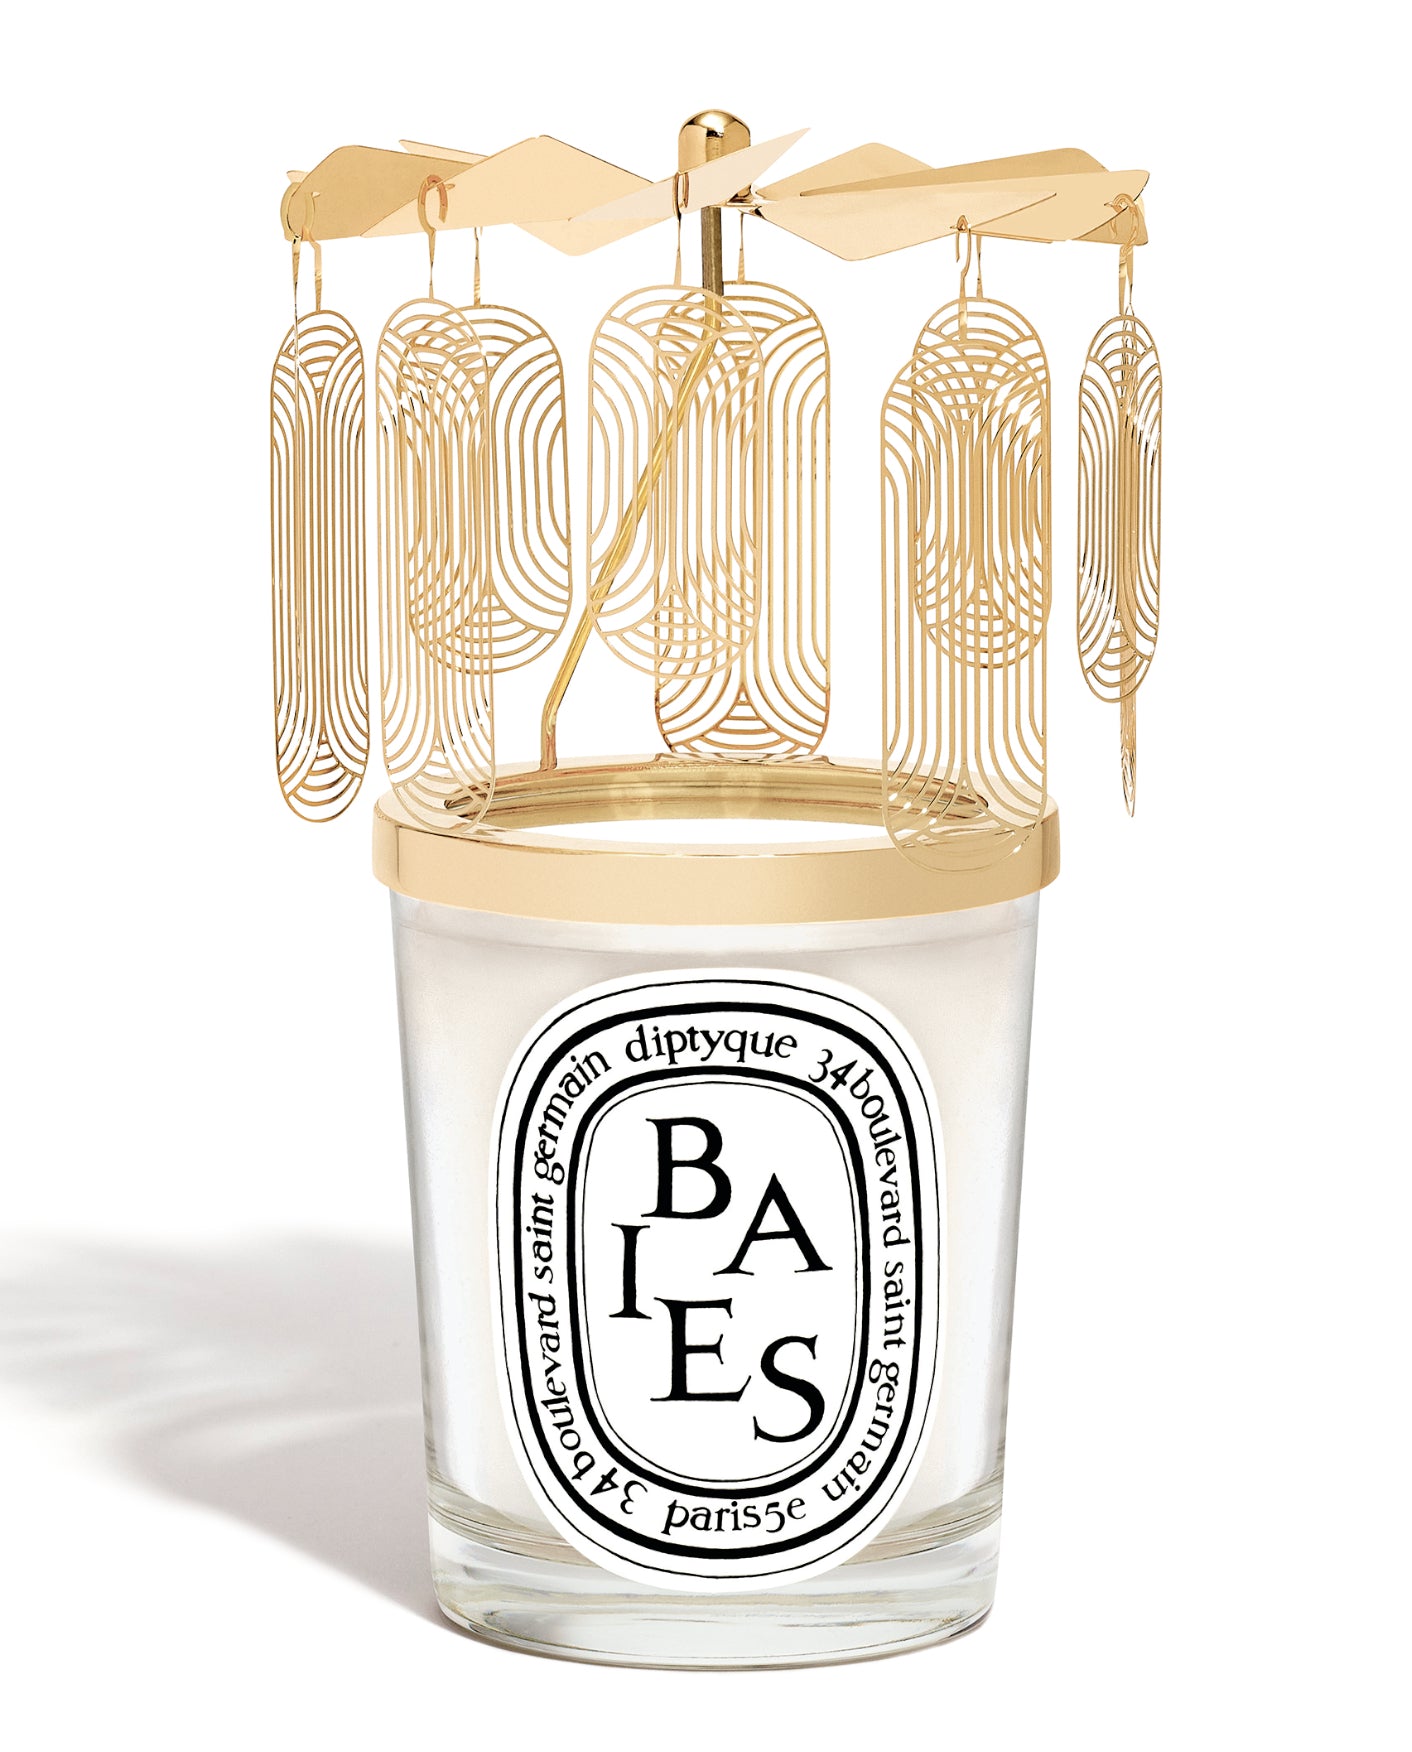 Diptyque Holiday Carousel Set With Standard Baies Candle